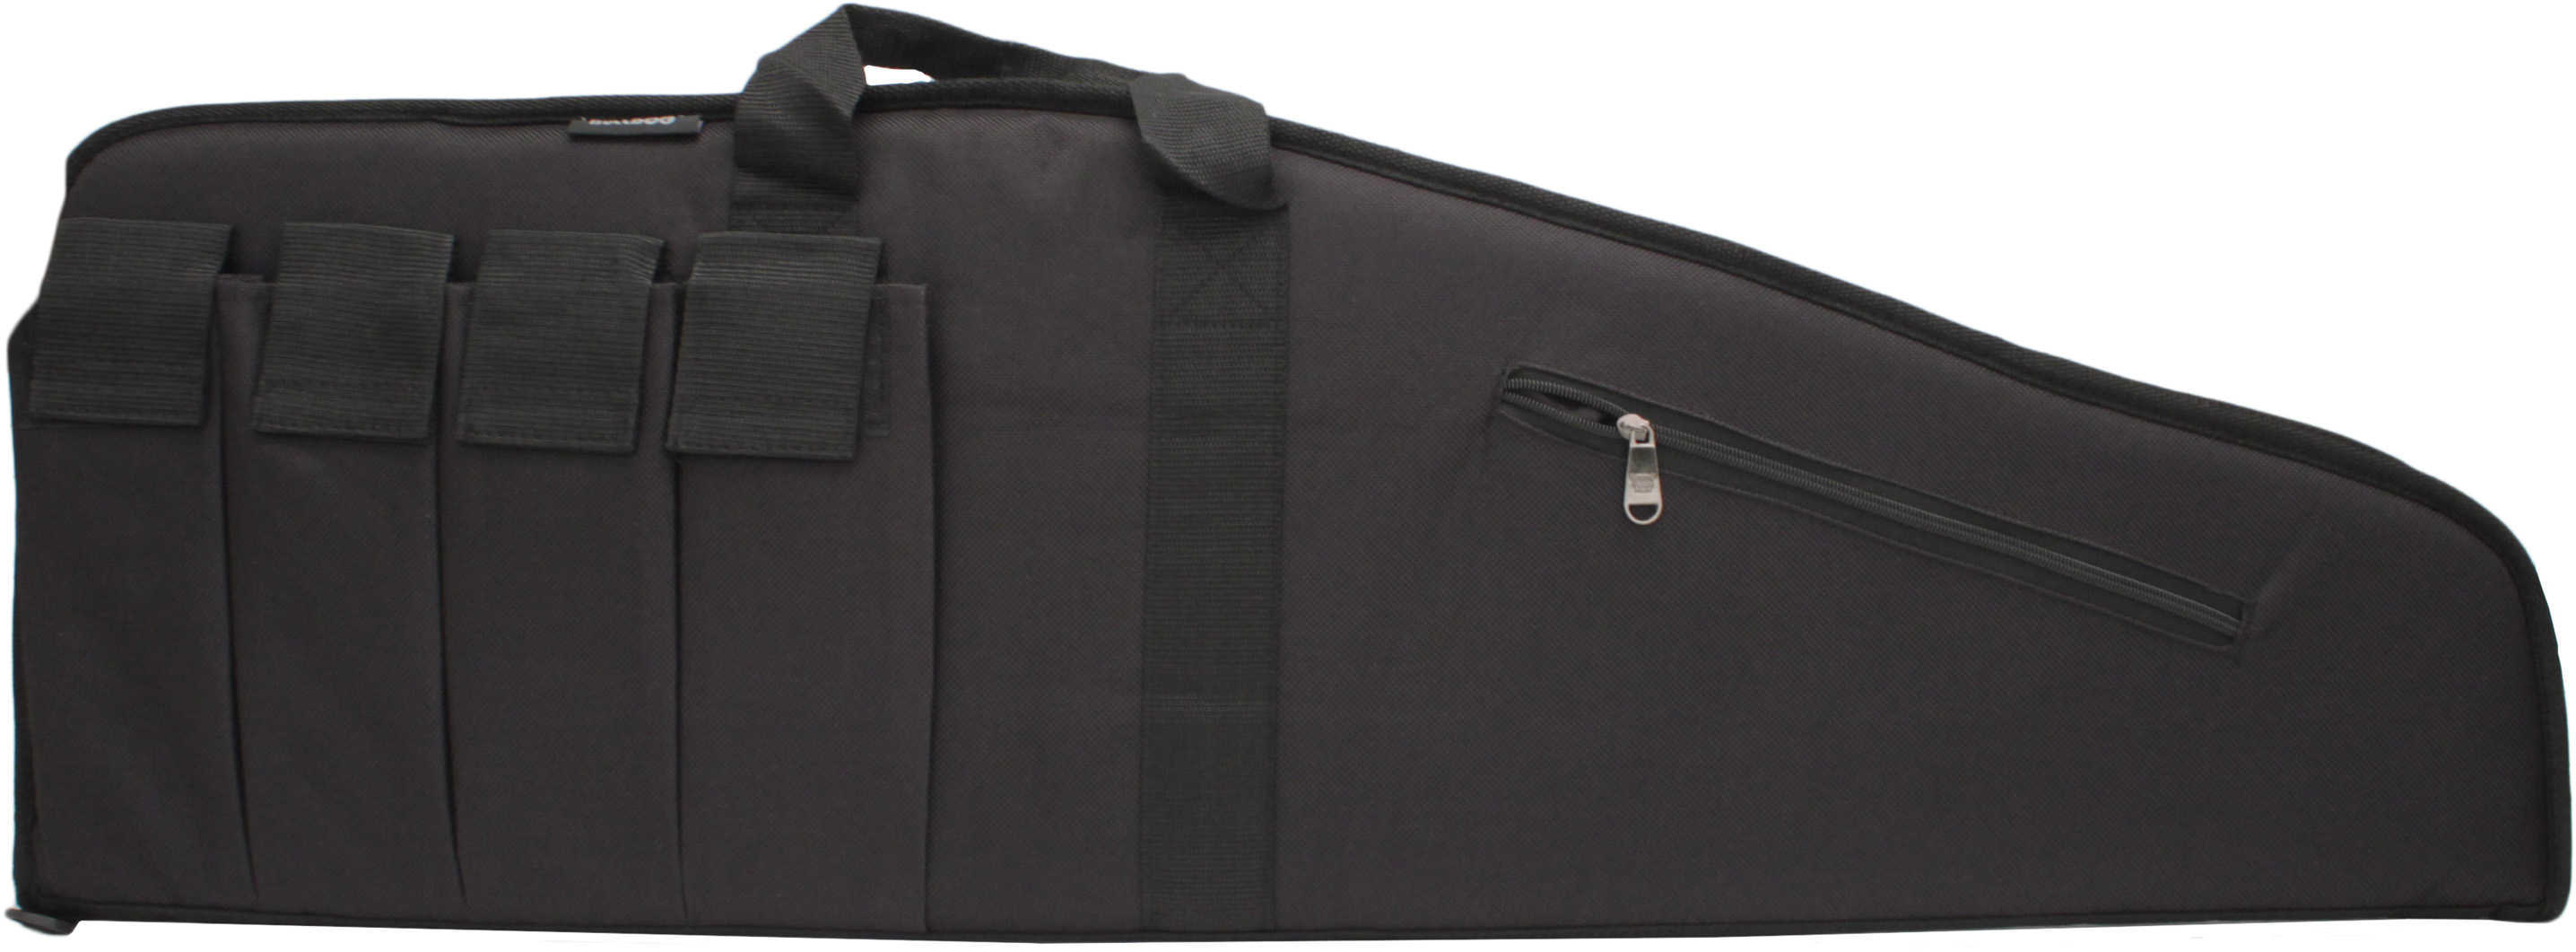 Bulldog Tactical Extreme 40" Black With Trim